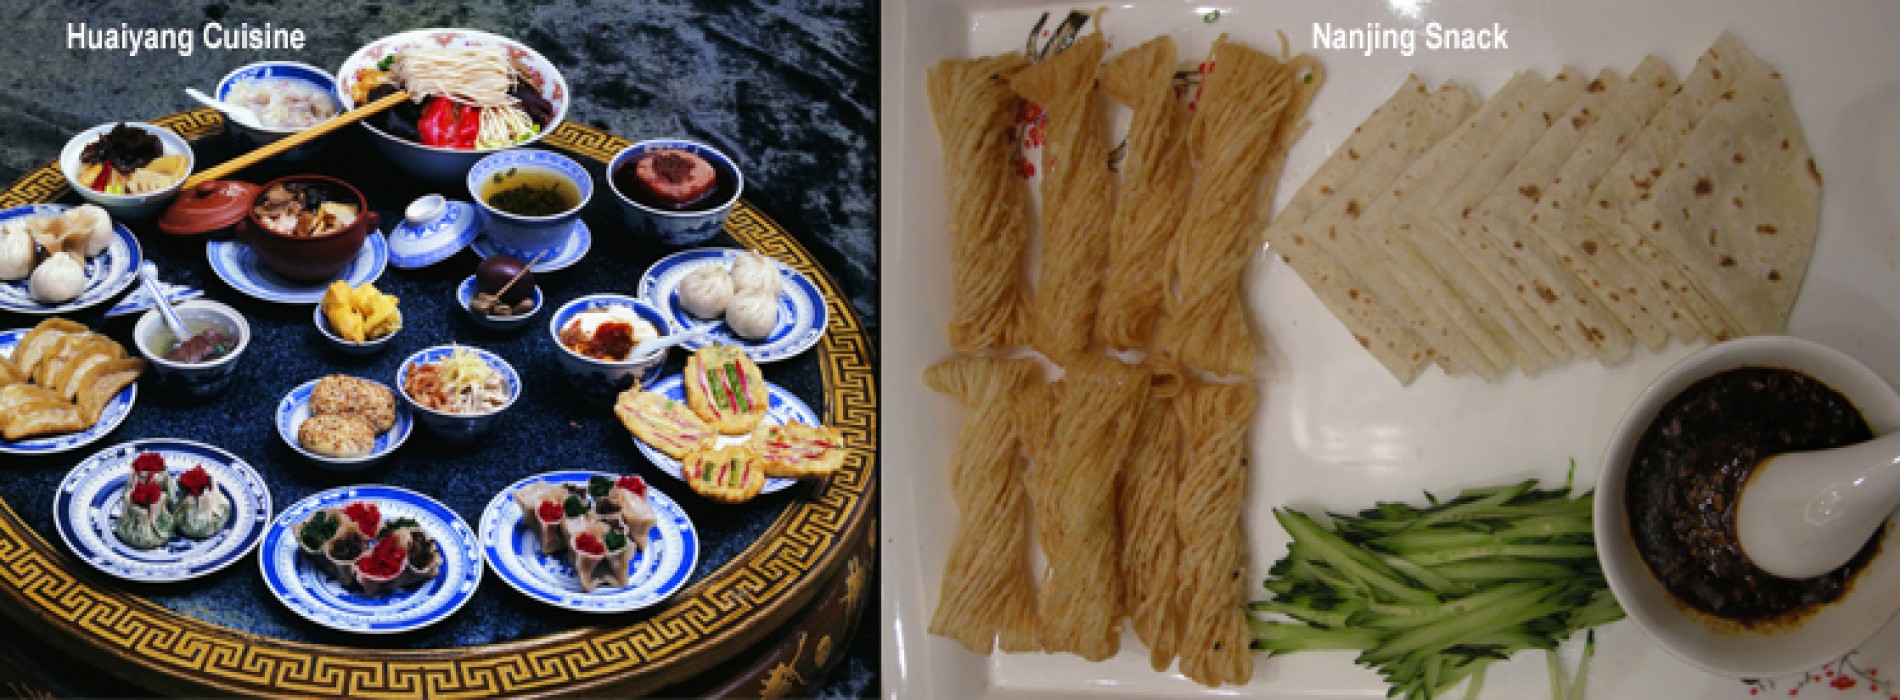 Huaiyang Cuisine, One of China’s Top Four Major Styles of Cooking